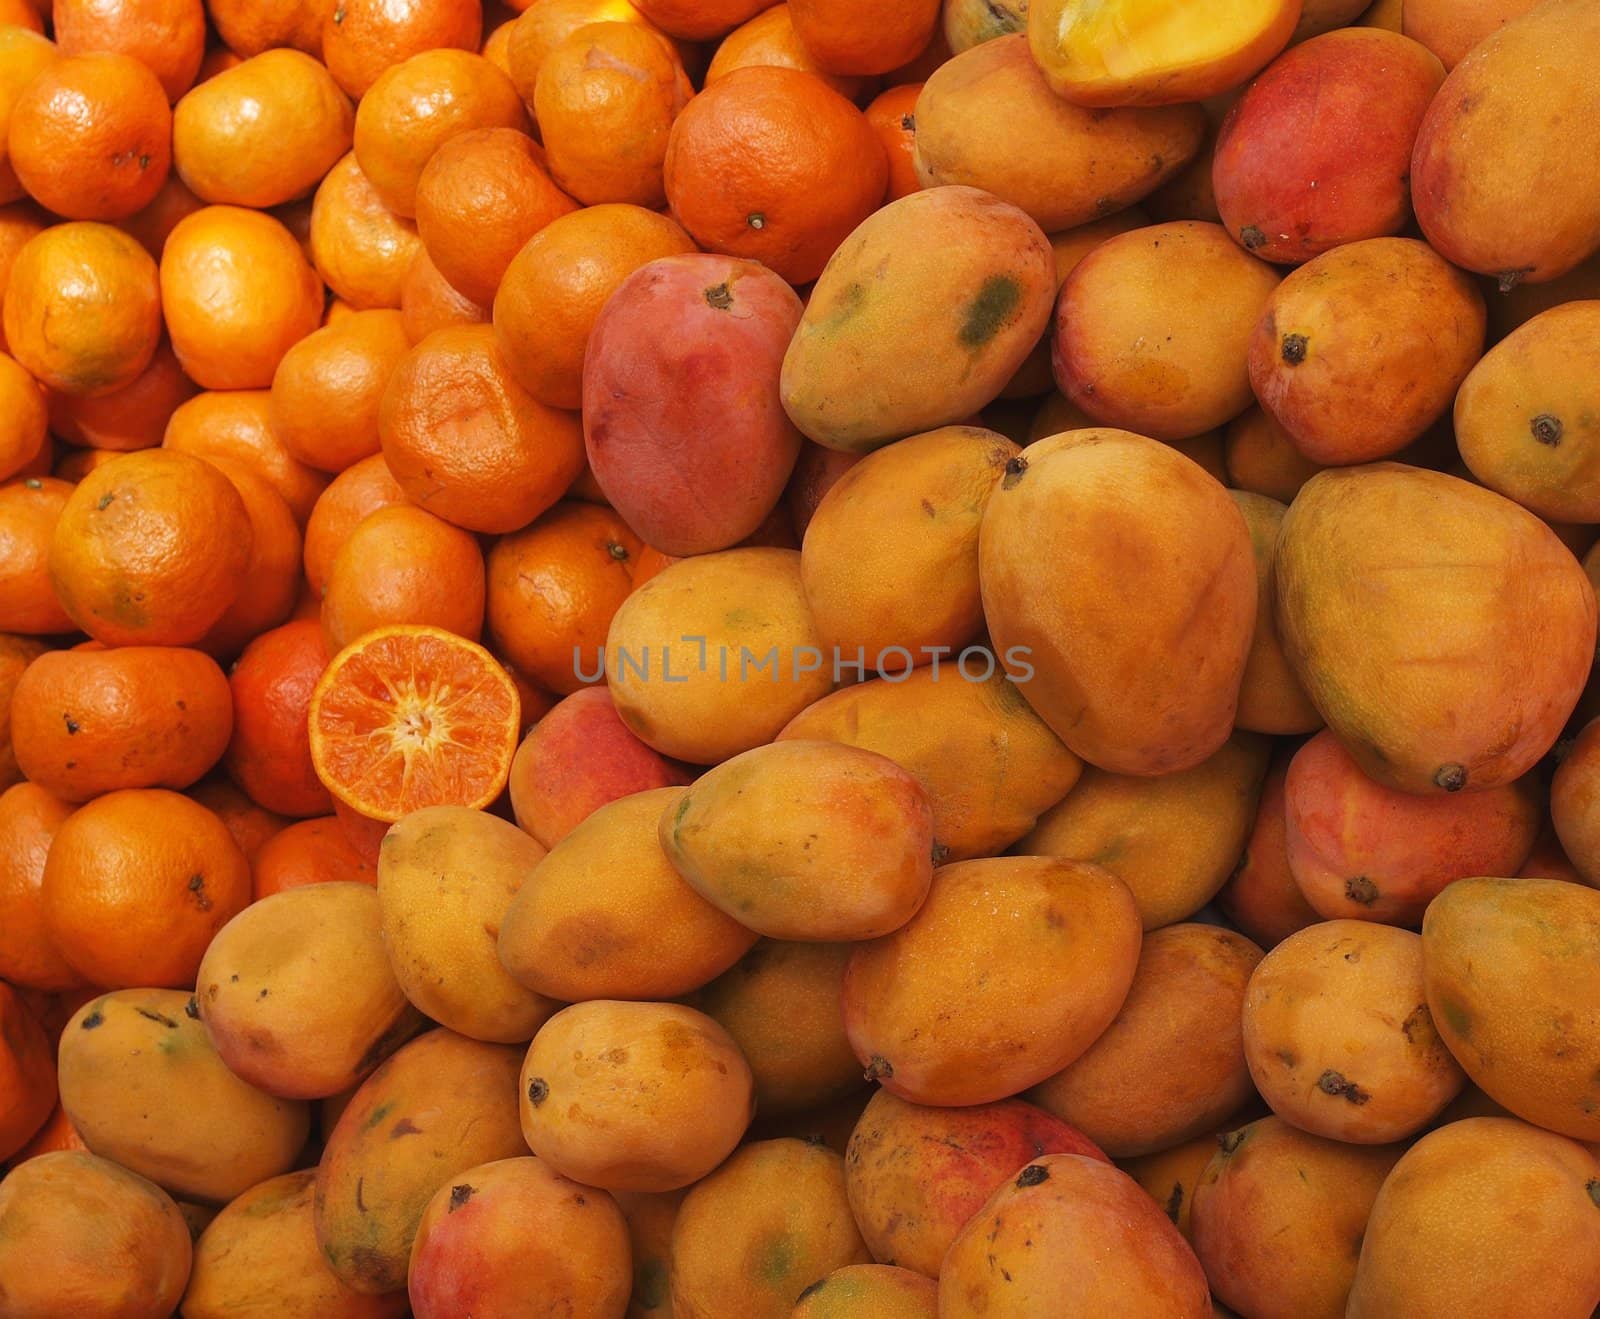 Oranges and mangos on the local marketplace, Peru